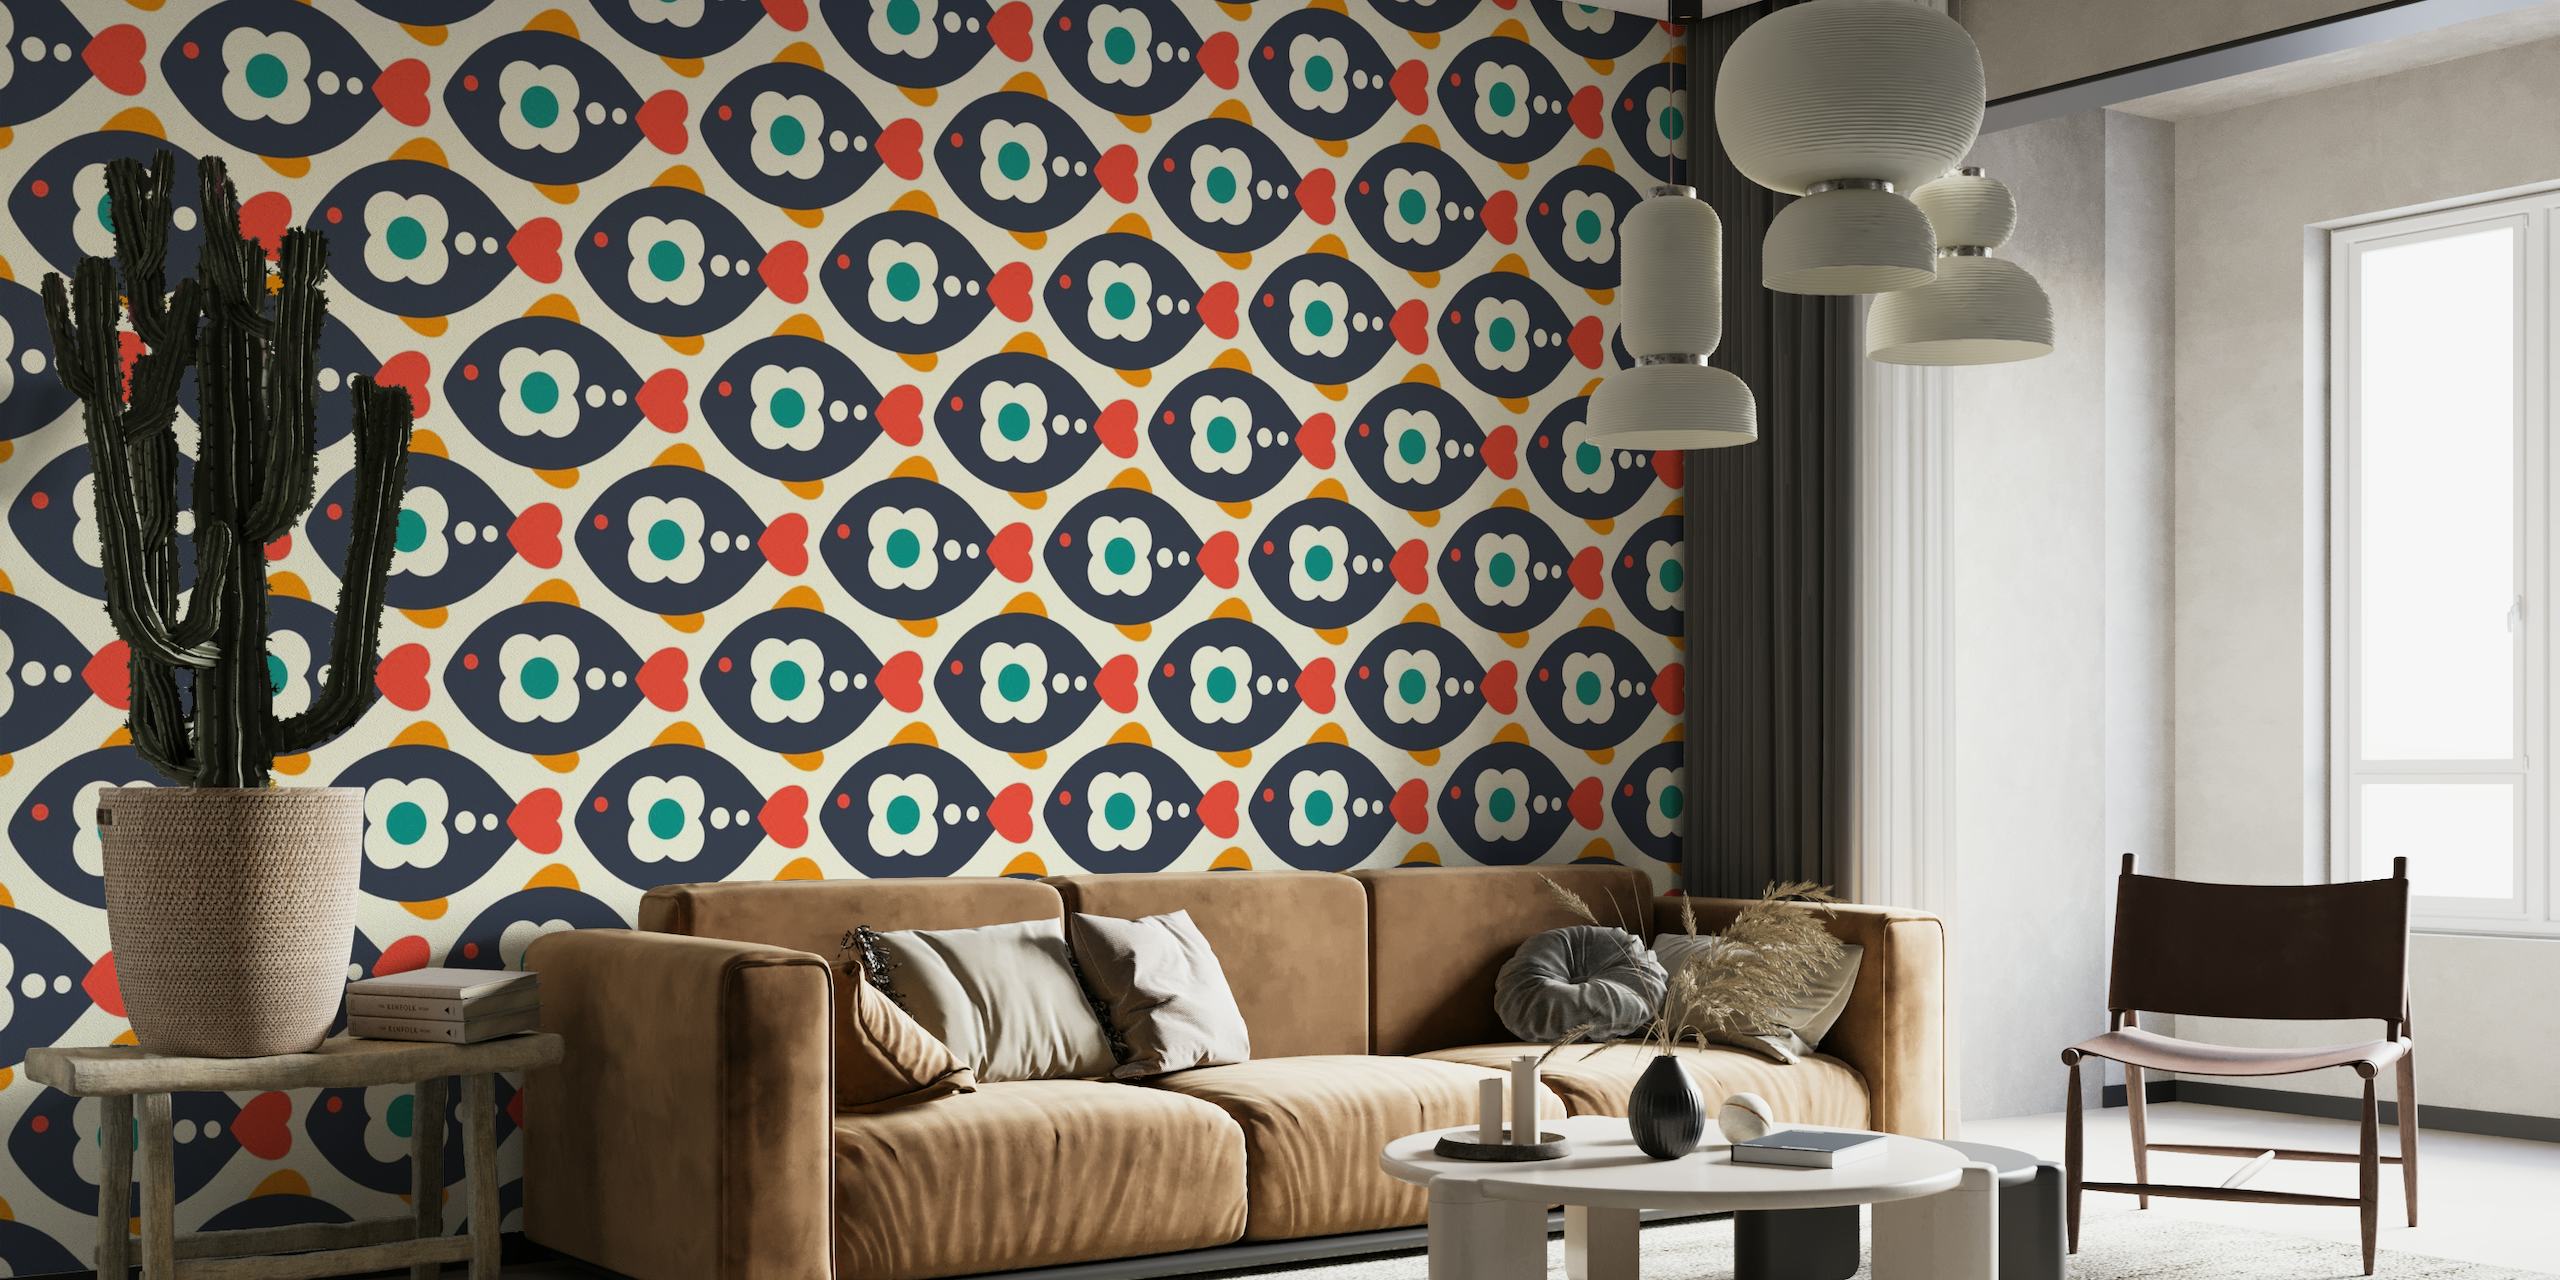 Retro-style wall mural with playful fish patterns in navy and red colors on Happywall.com